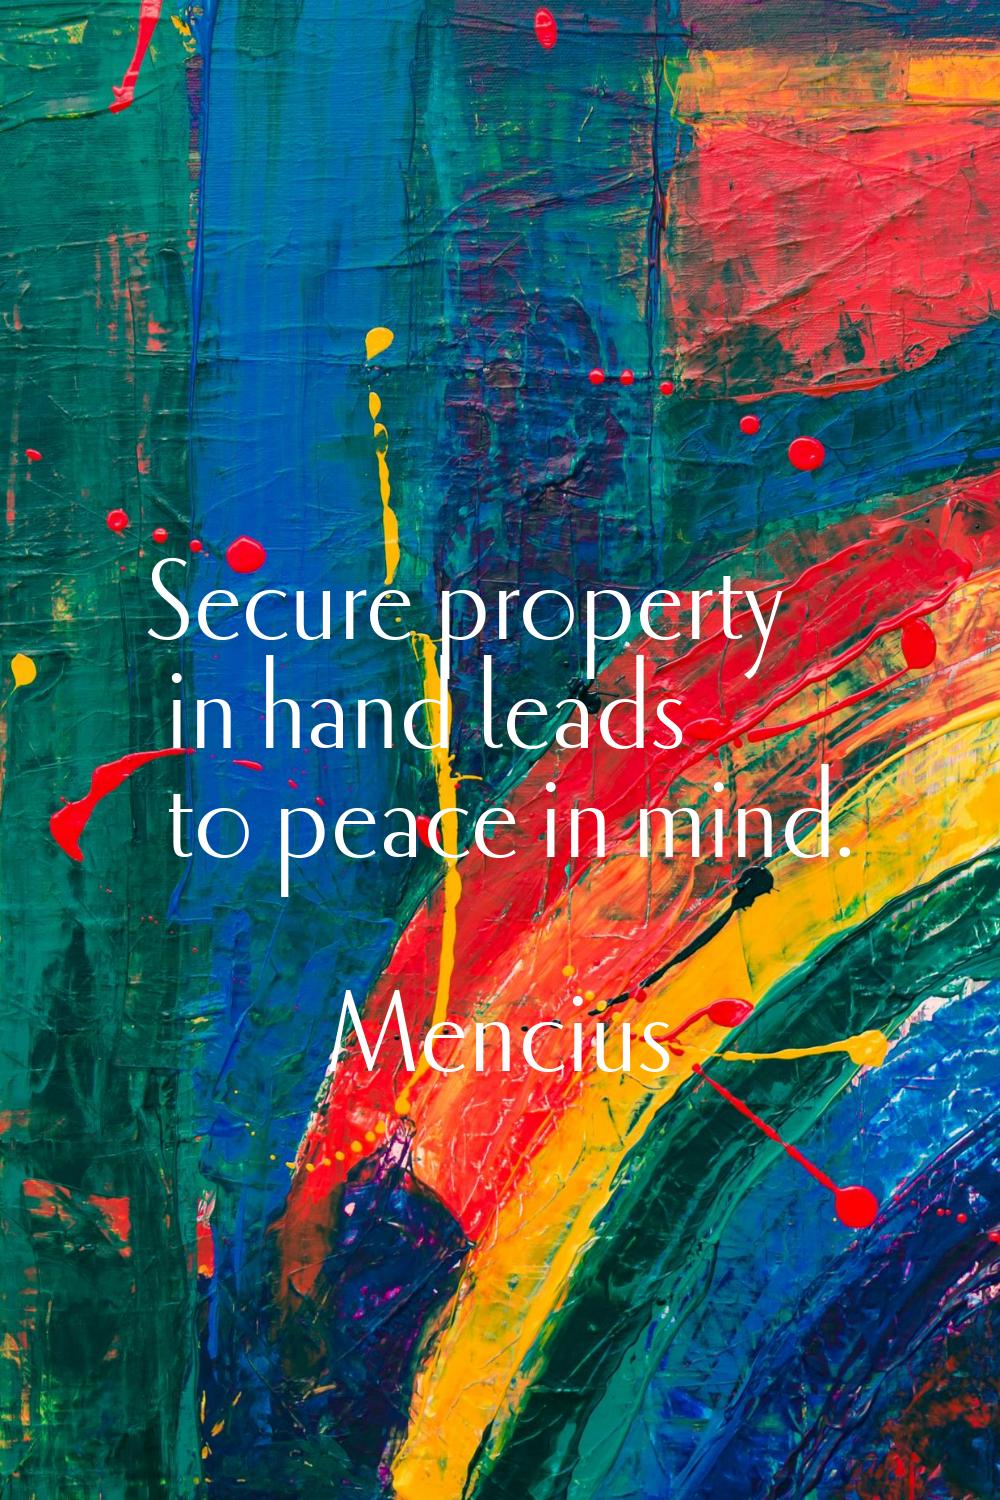 Secure property in hand leads to peace in mind.